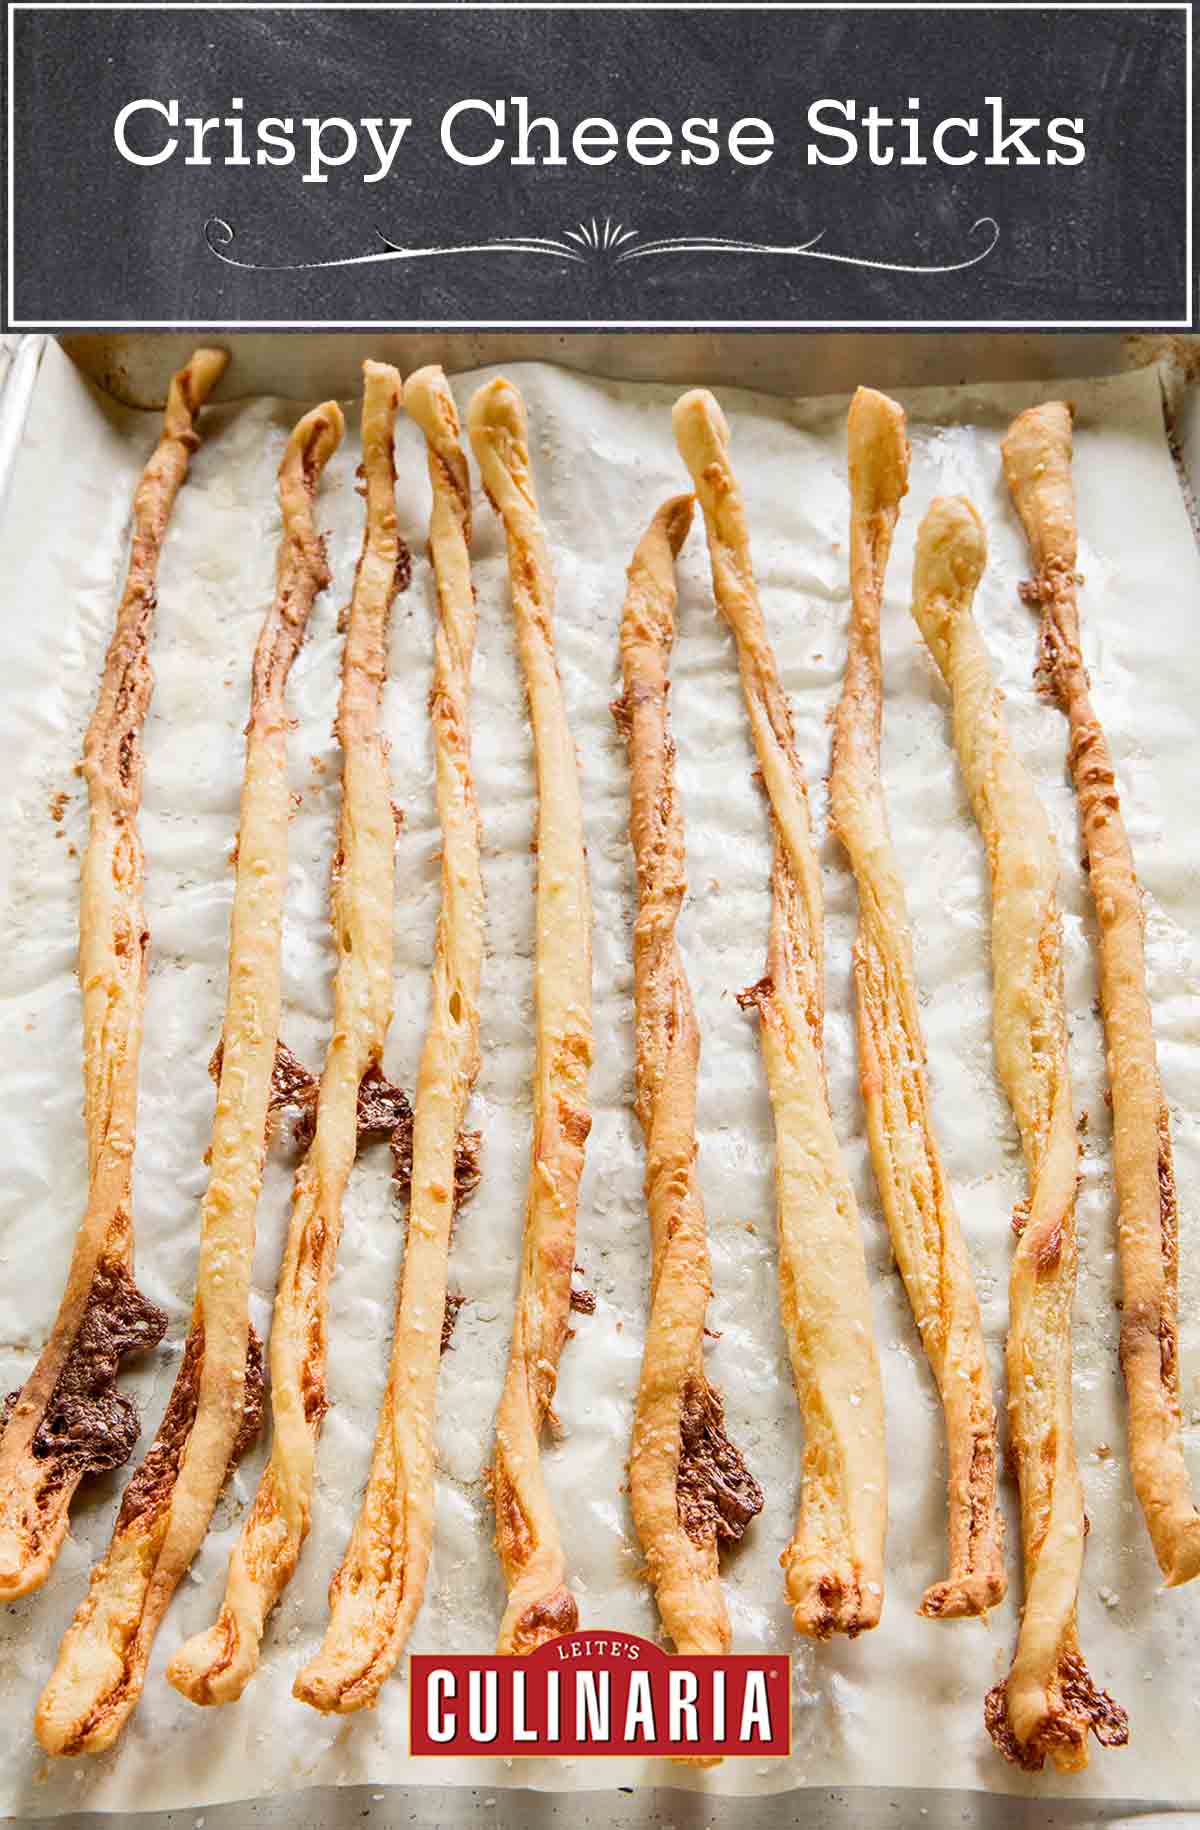 A baking sheet lined with parchment filled with 10 long, thin crispy cheese sticks.